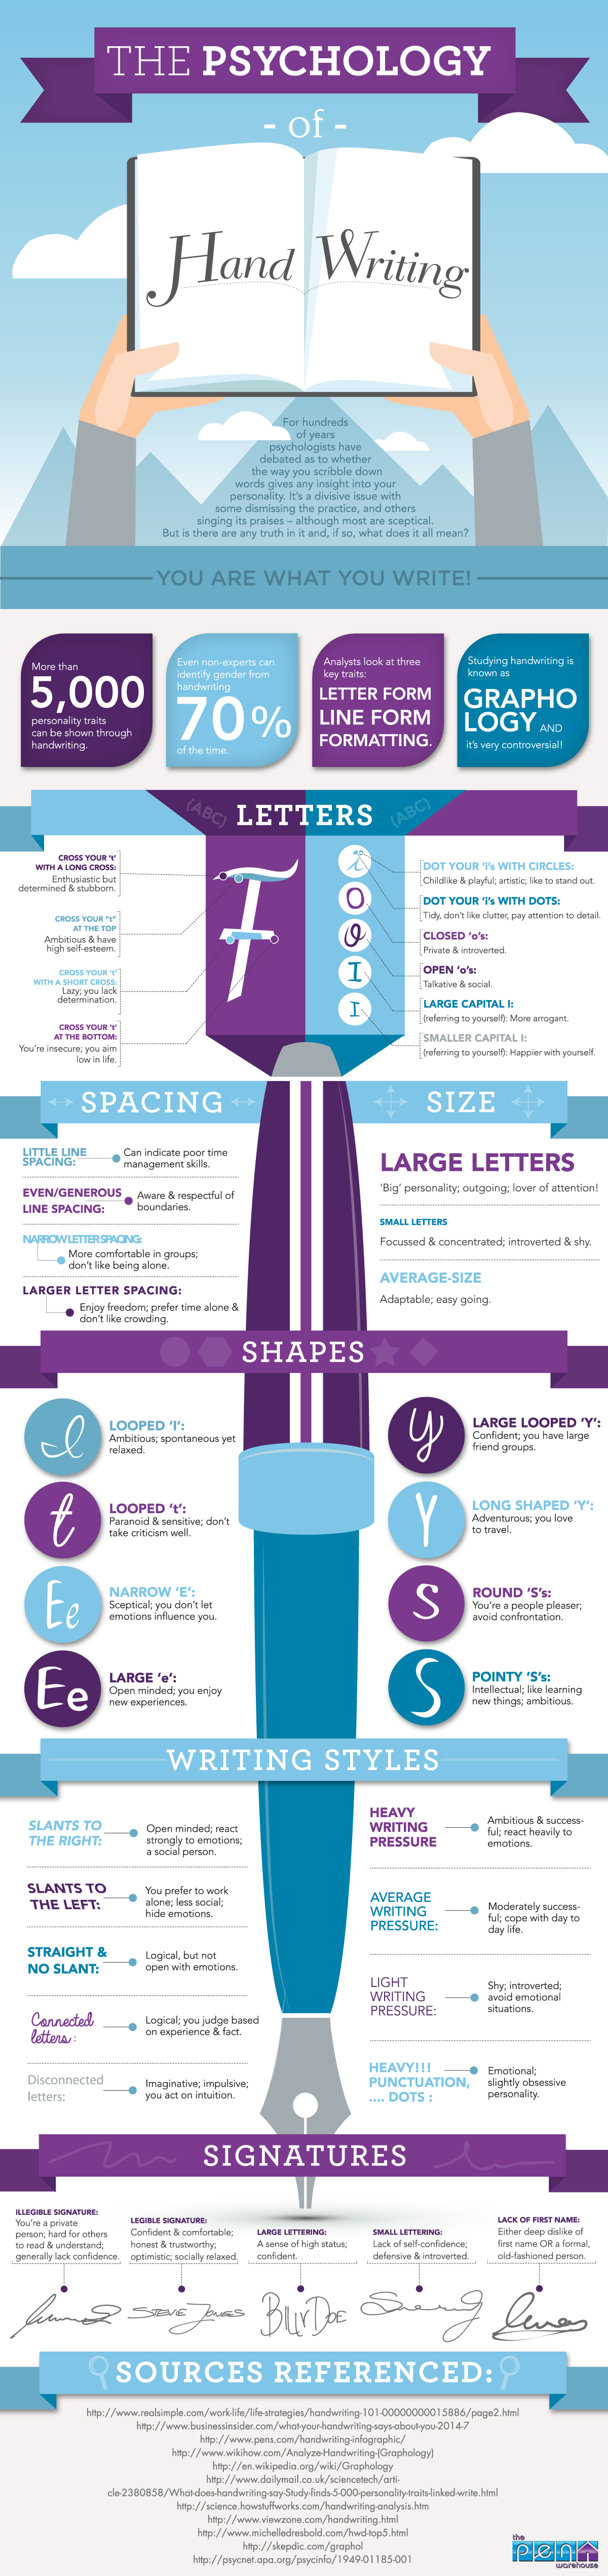 Infographic on the Psychology of Handwriting by Pens.co.uk